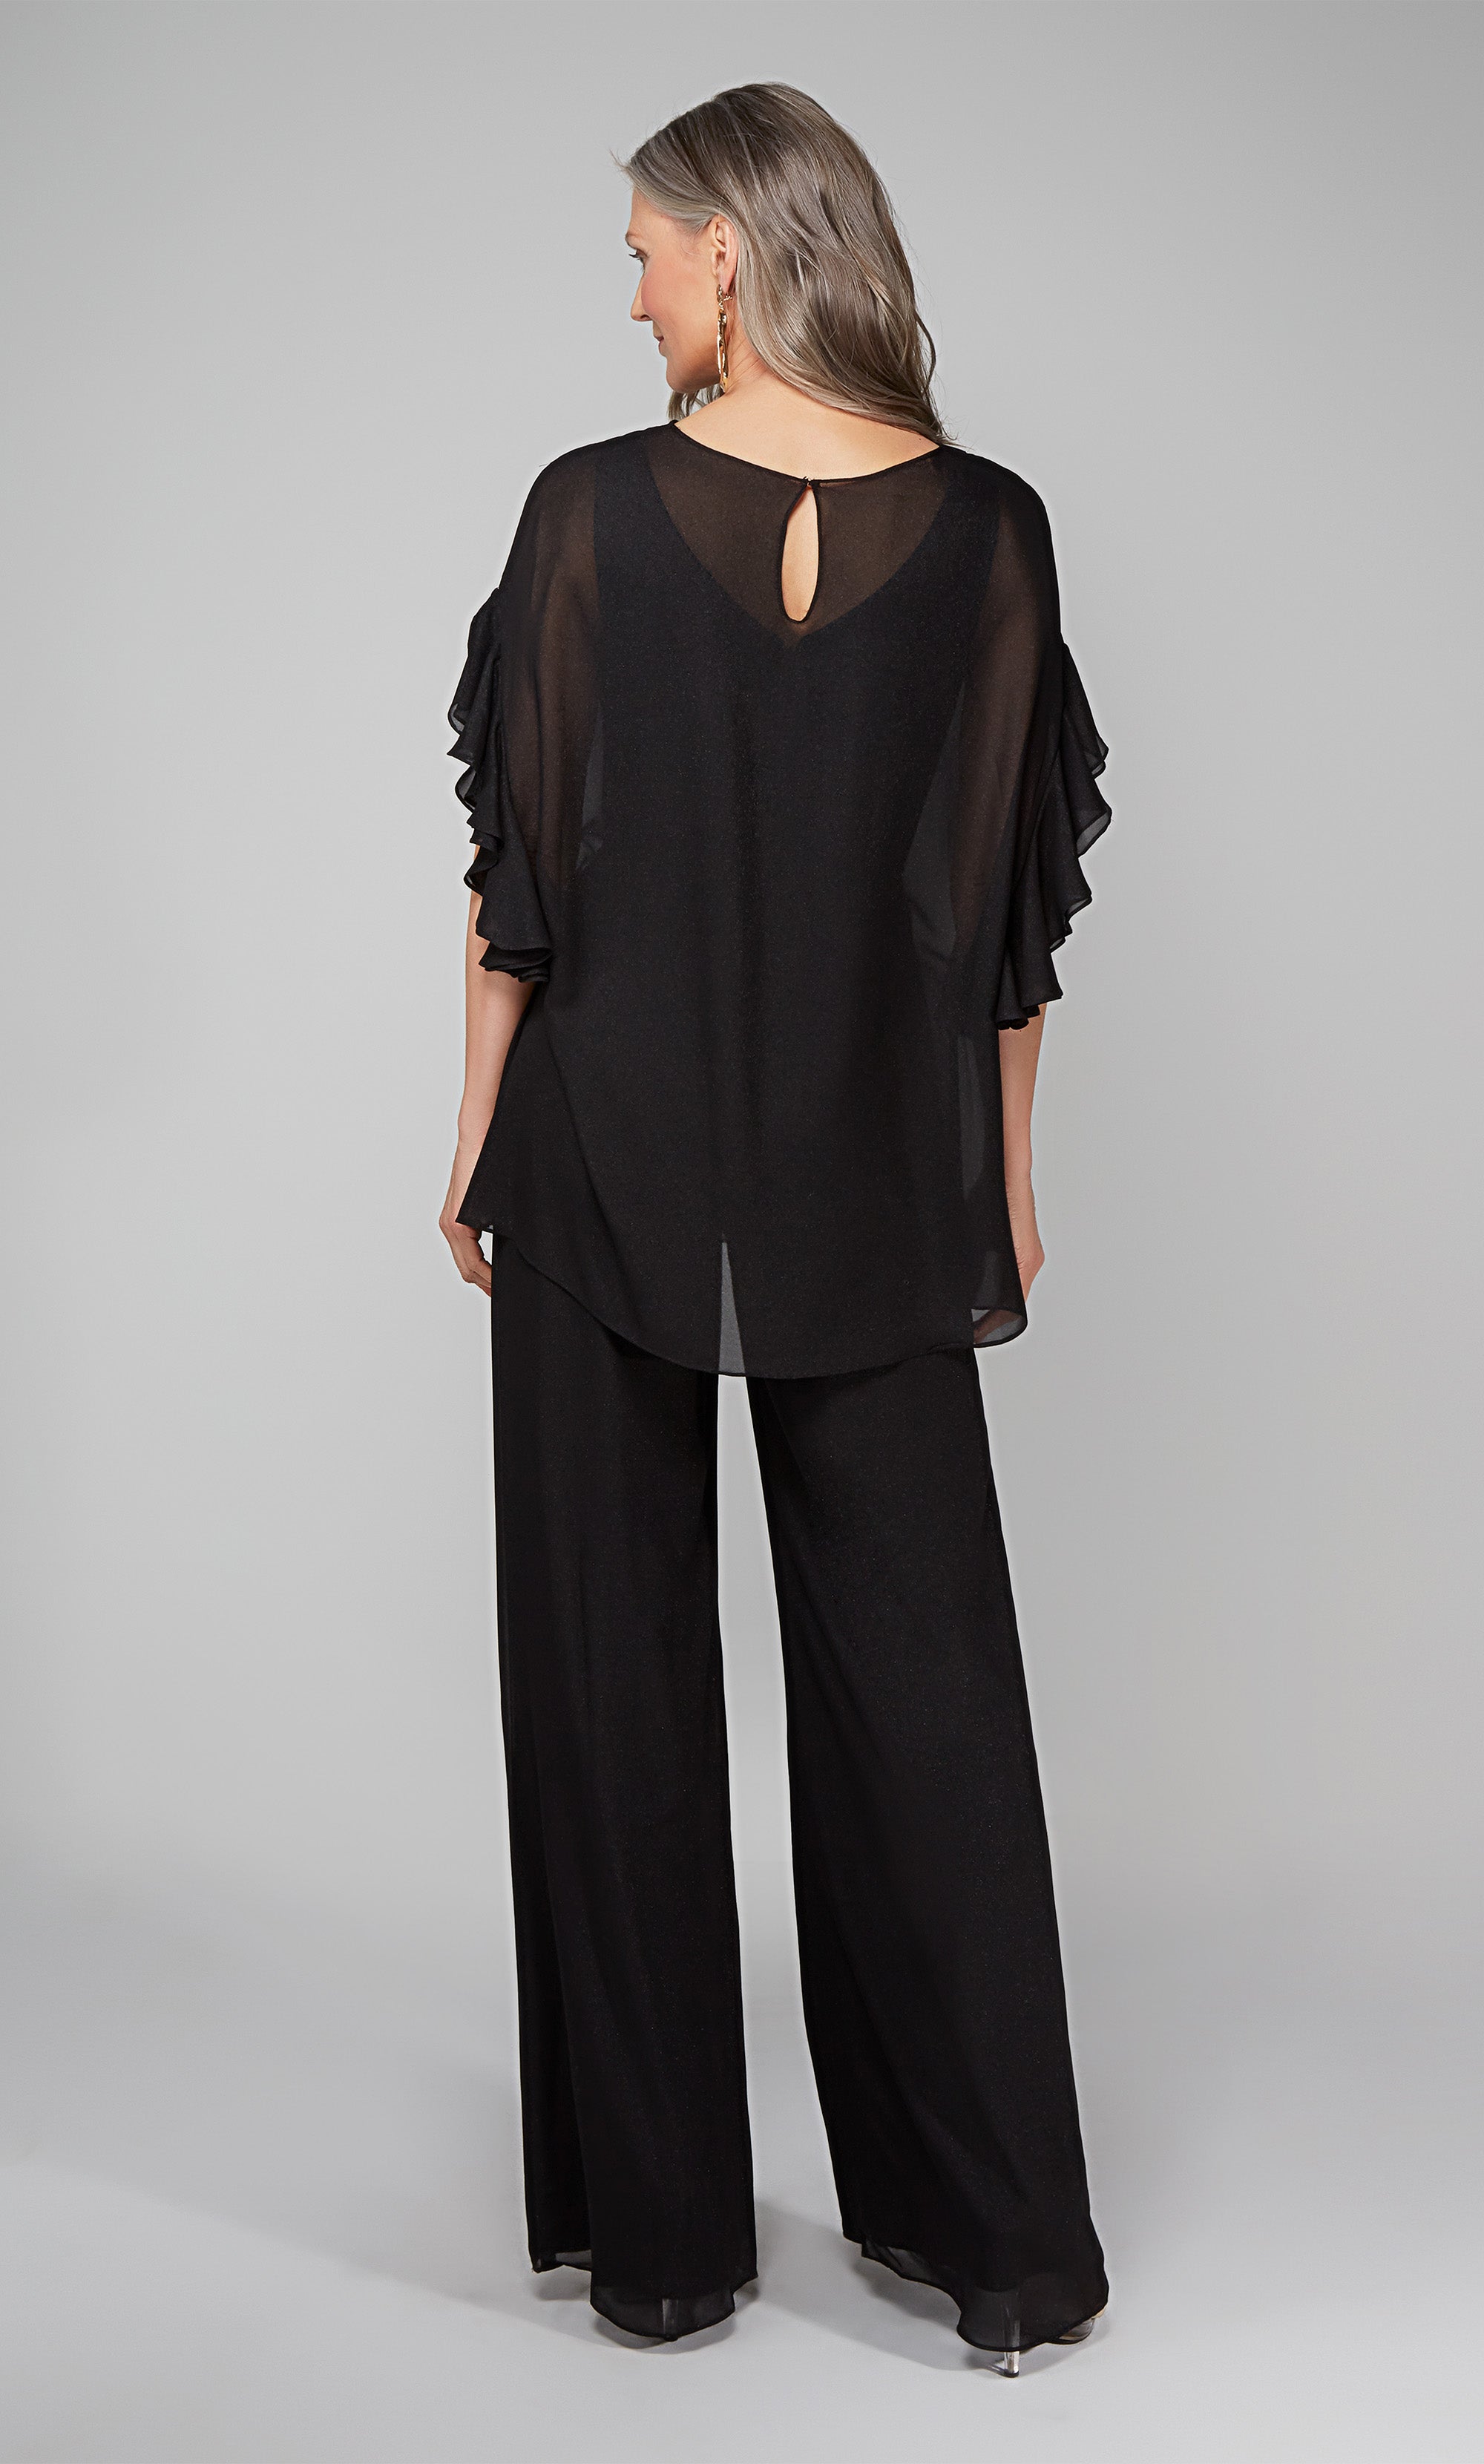 Black formal jumpsuit with ruffle sleeve, sheer cover up. Color-SWATCH_27633__BLACK